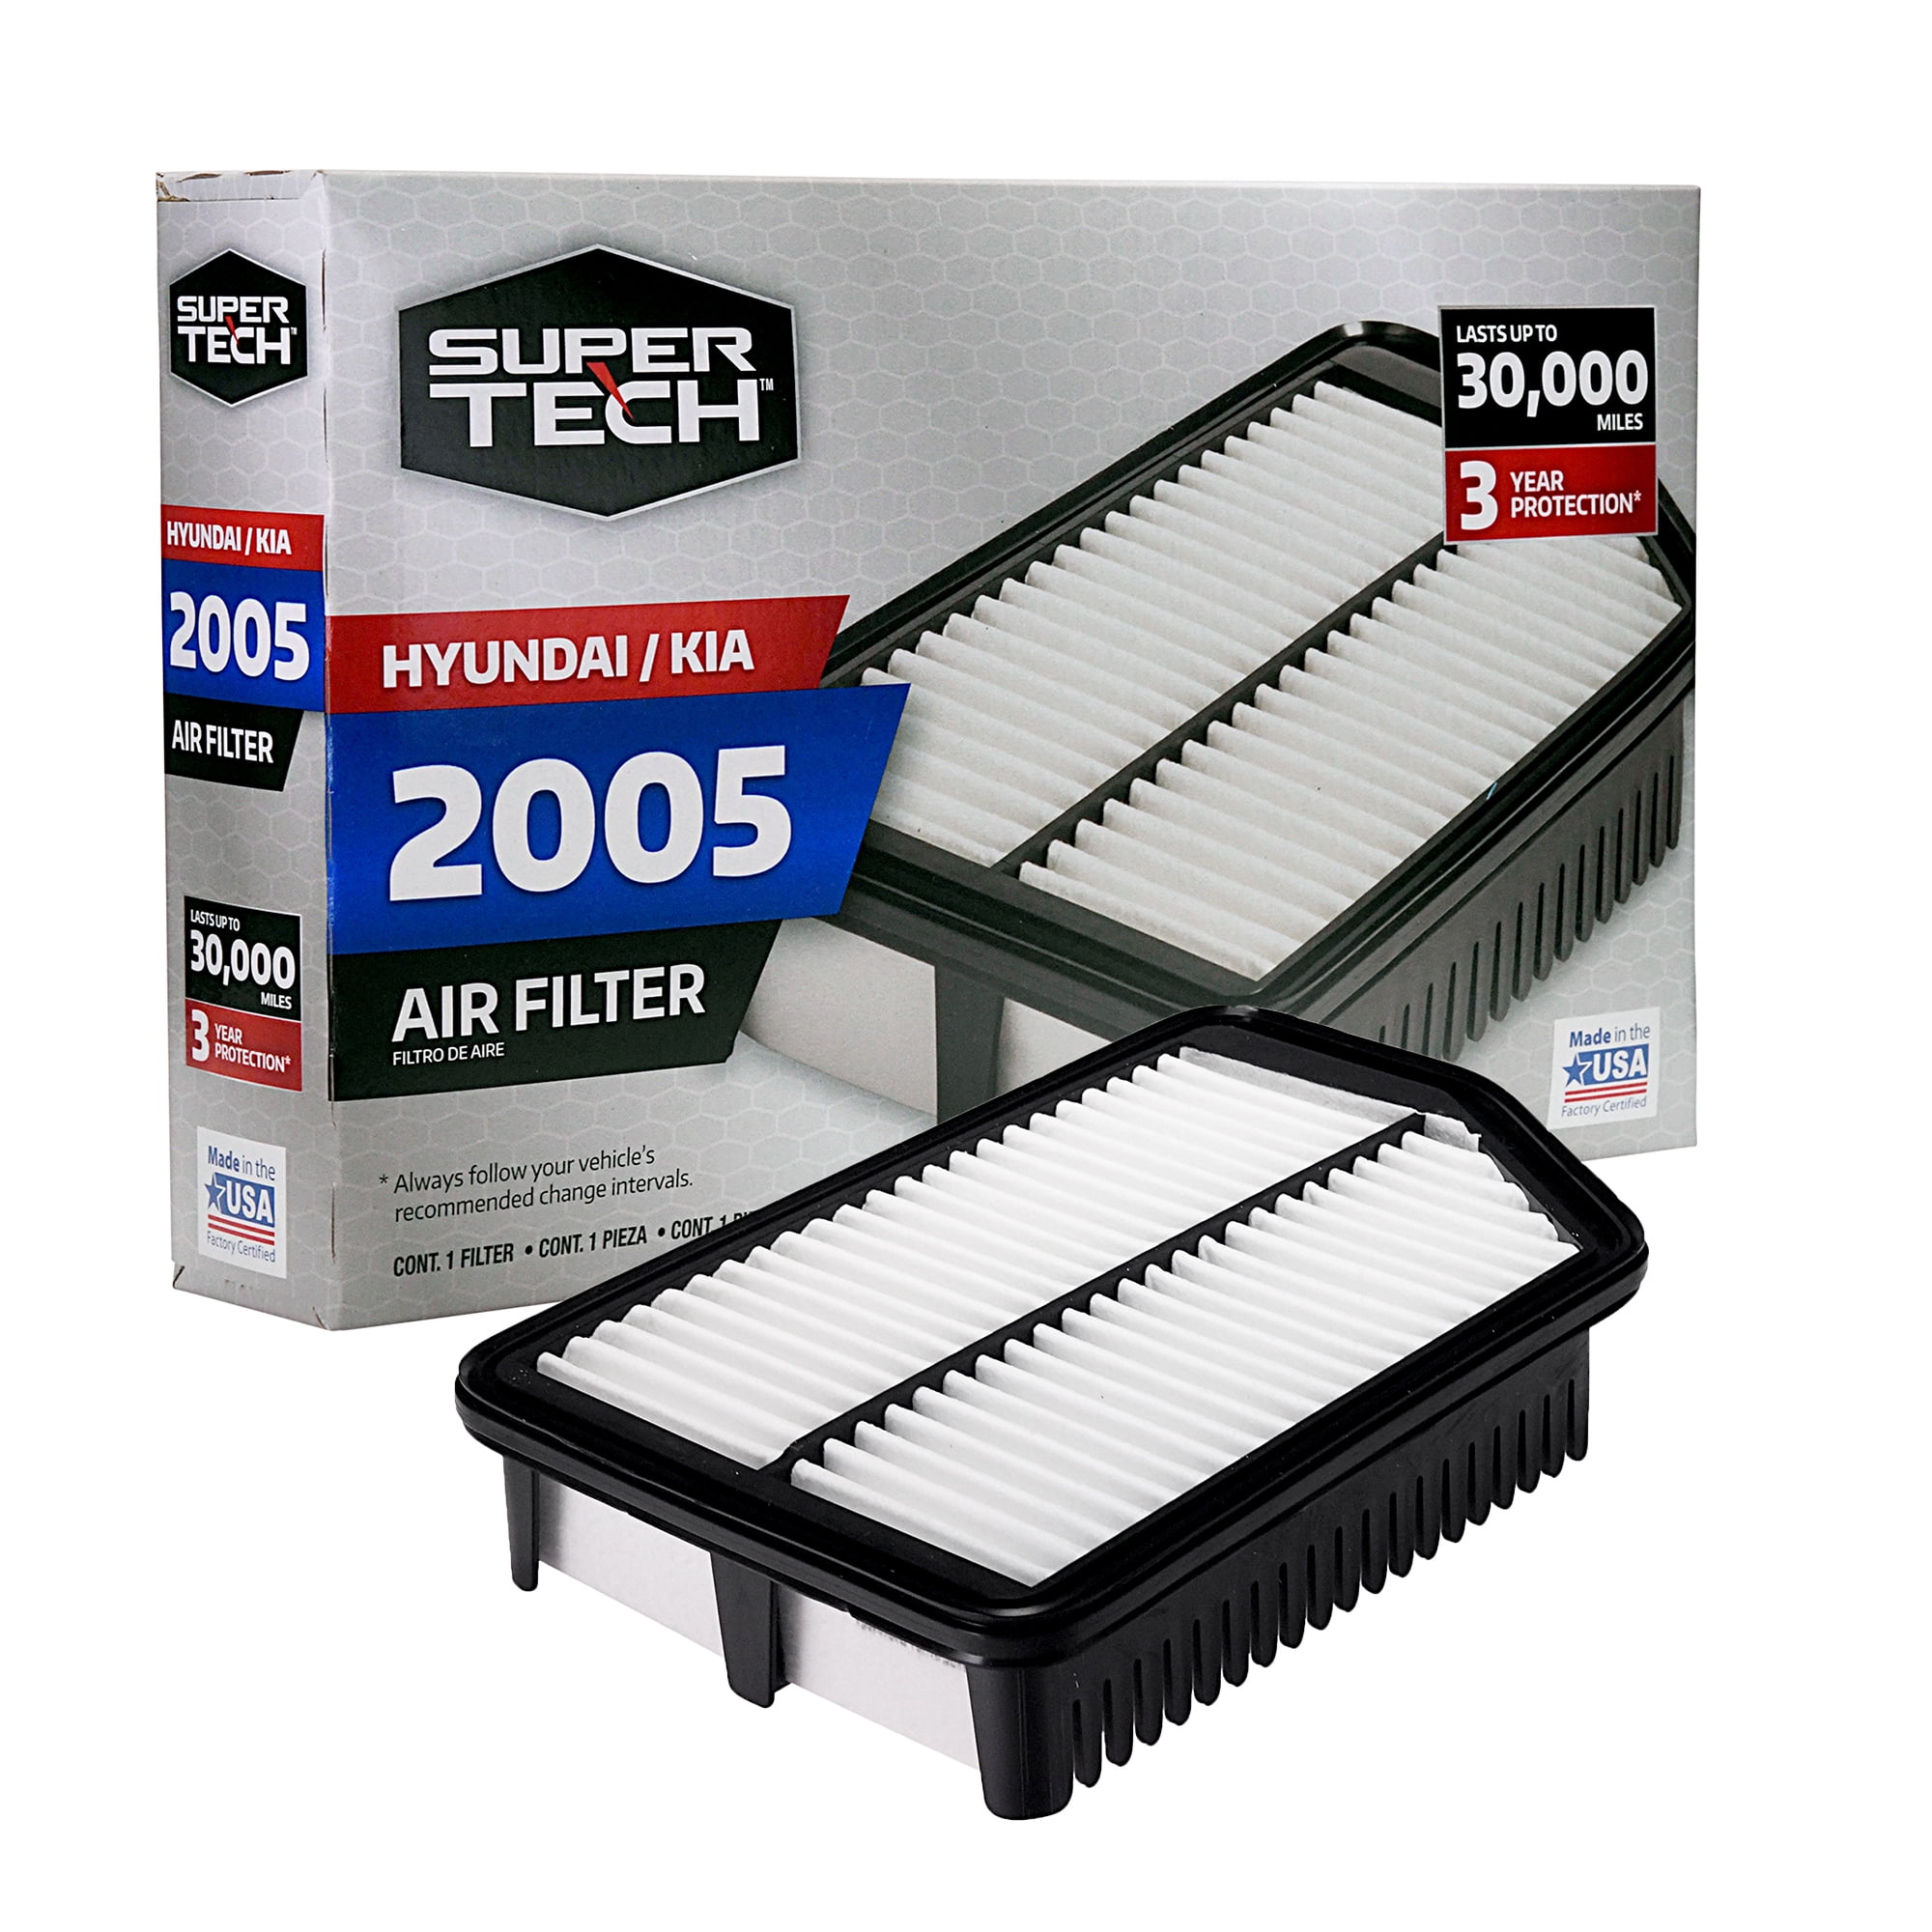 SuperTech 2005 Engine Air Filter, Replacement Filter for Hyundai and Kia